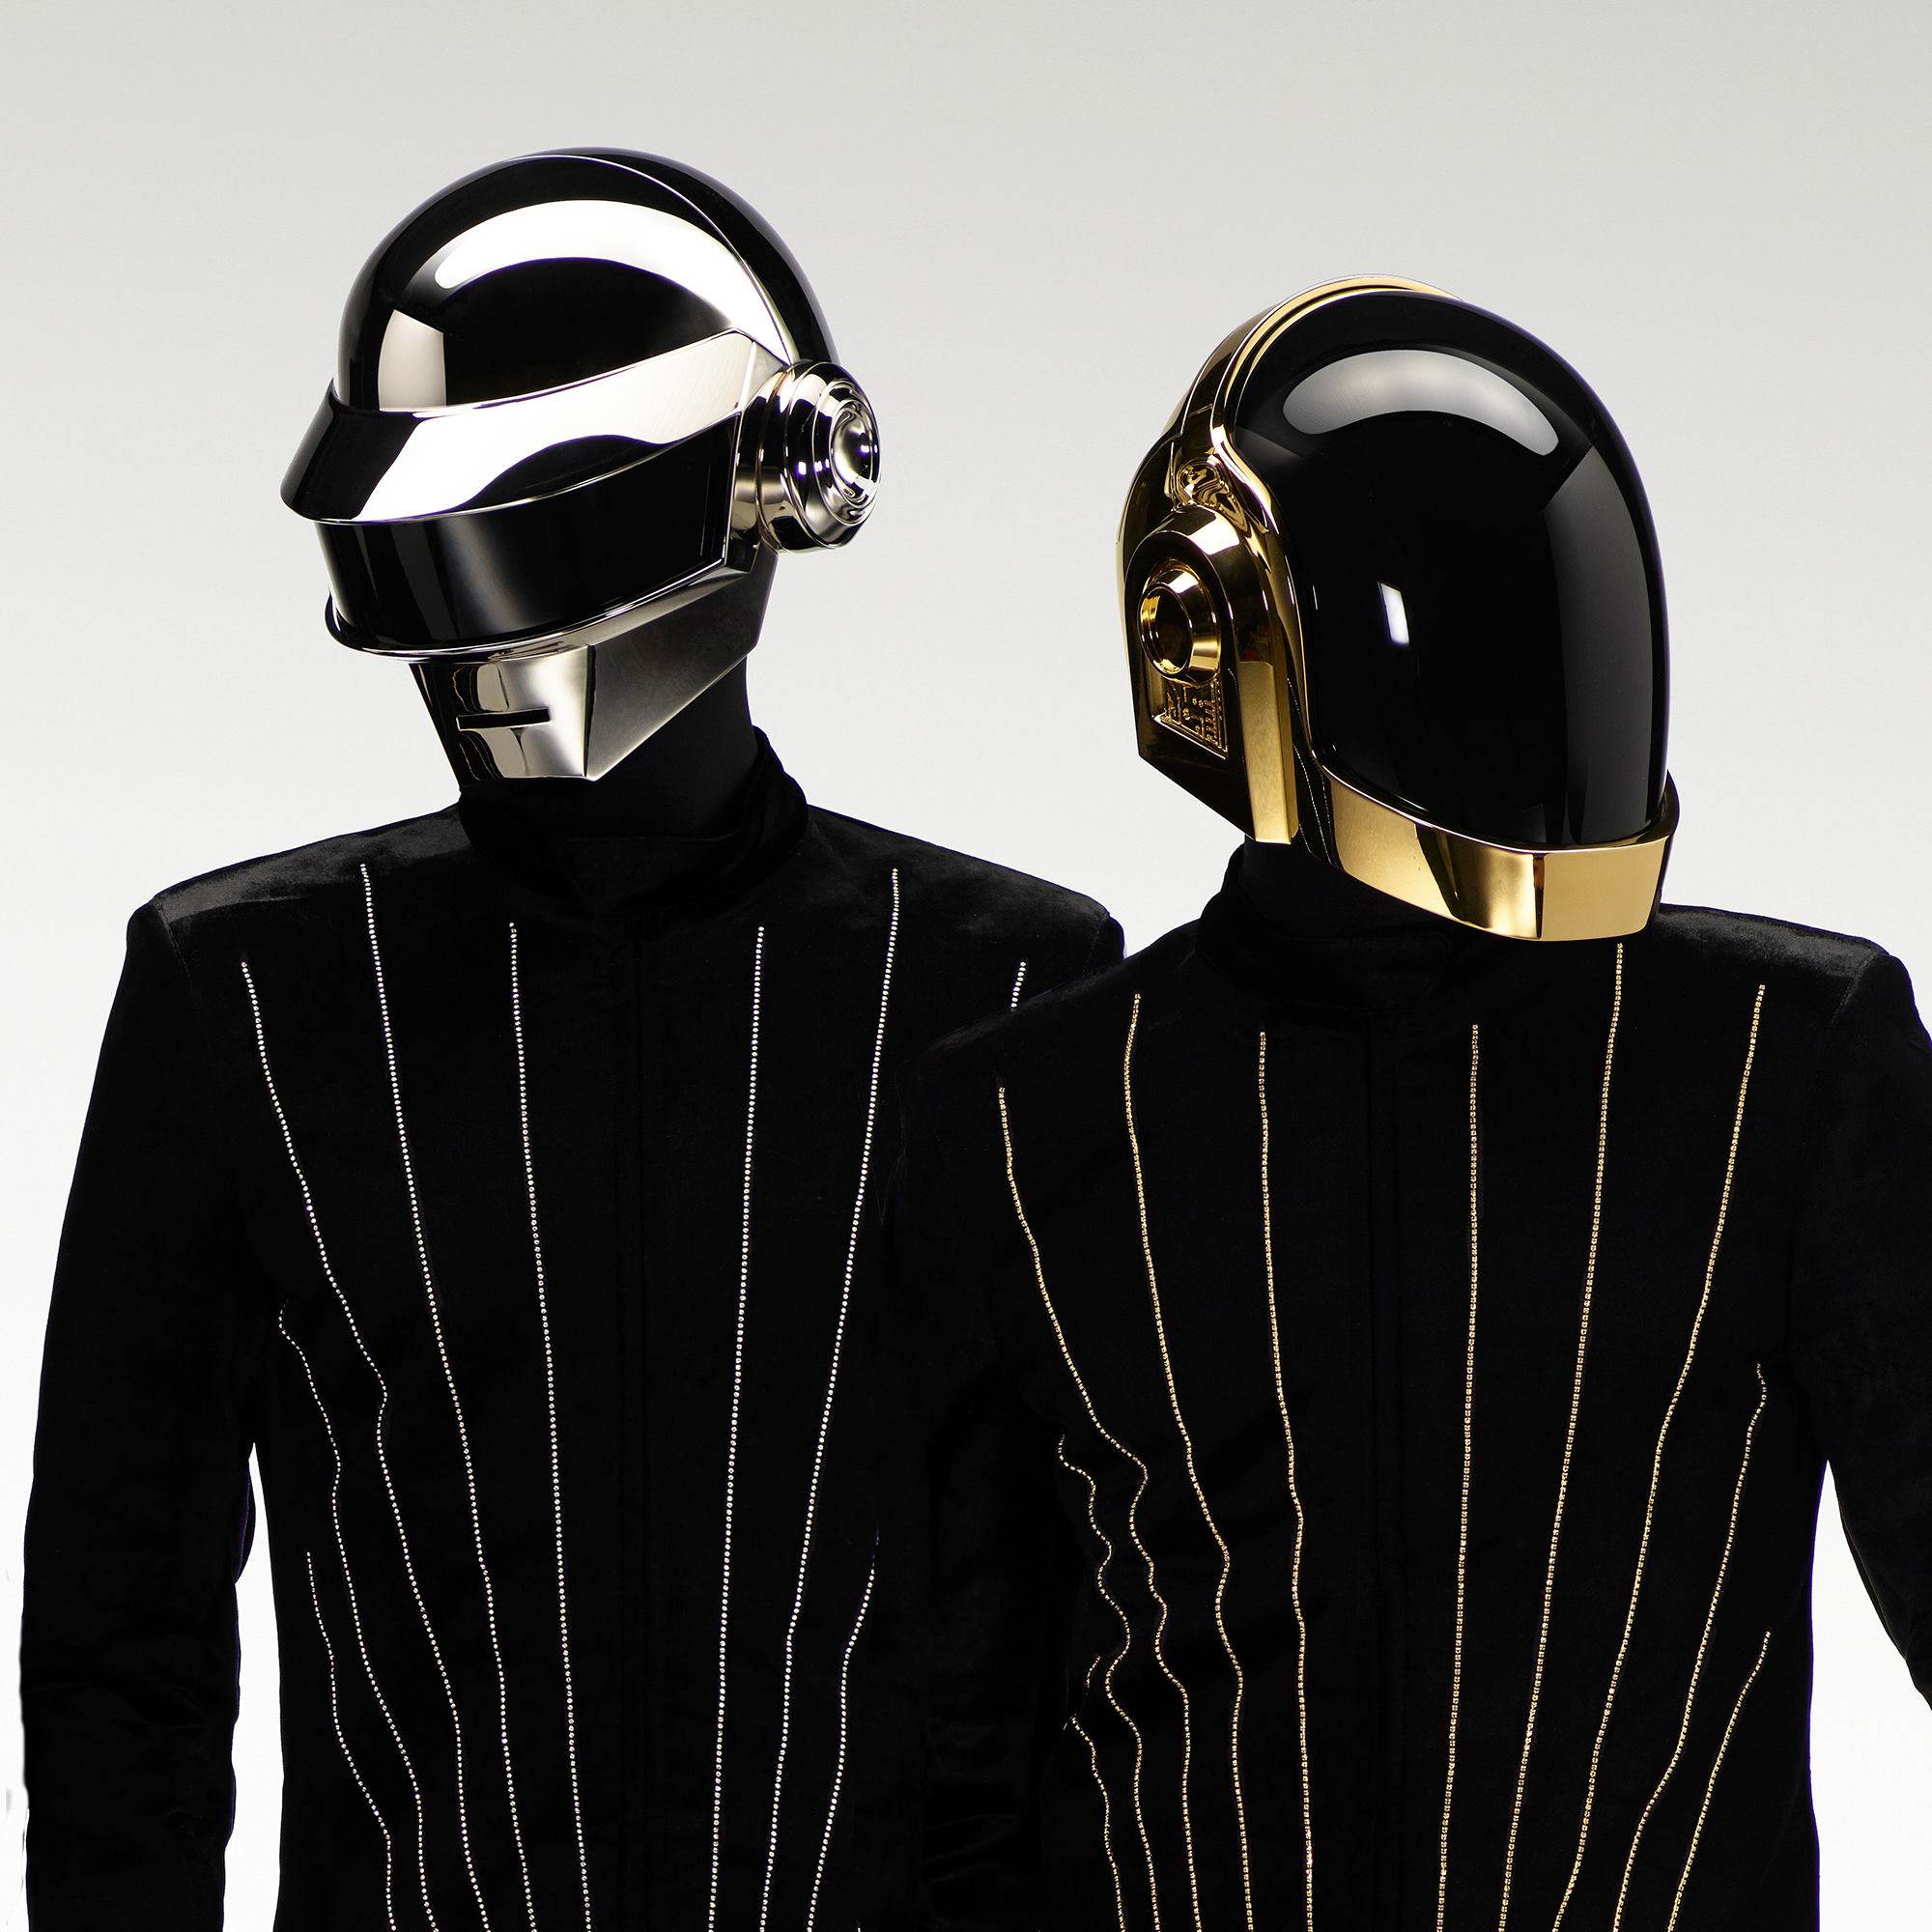 5 Emerging Acts to Listen to if You Love Daft Punk - Tigresounds - Music  Platform for the Global Citizen